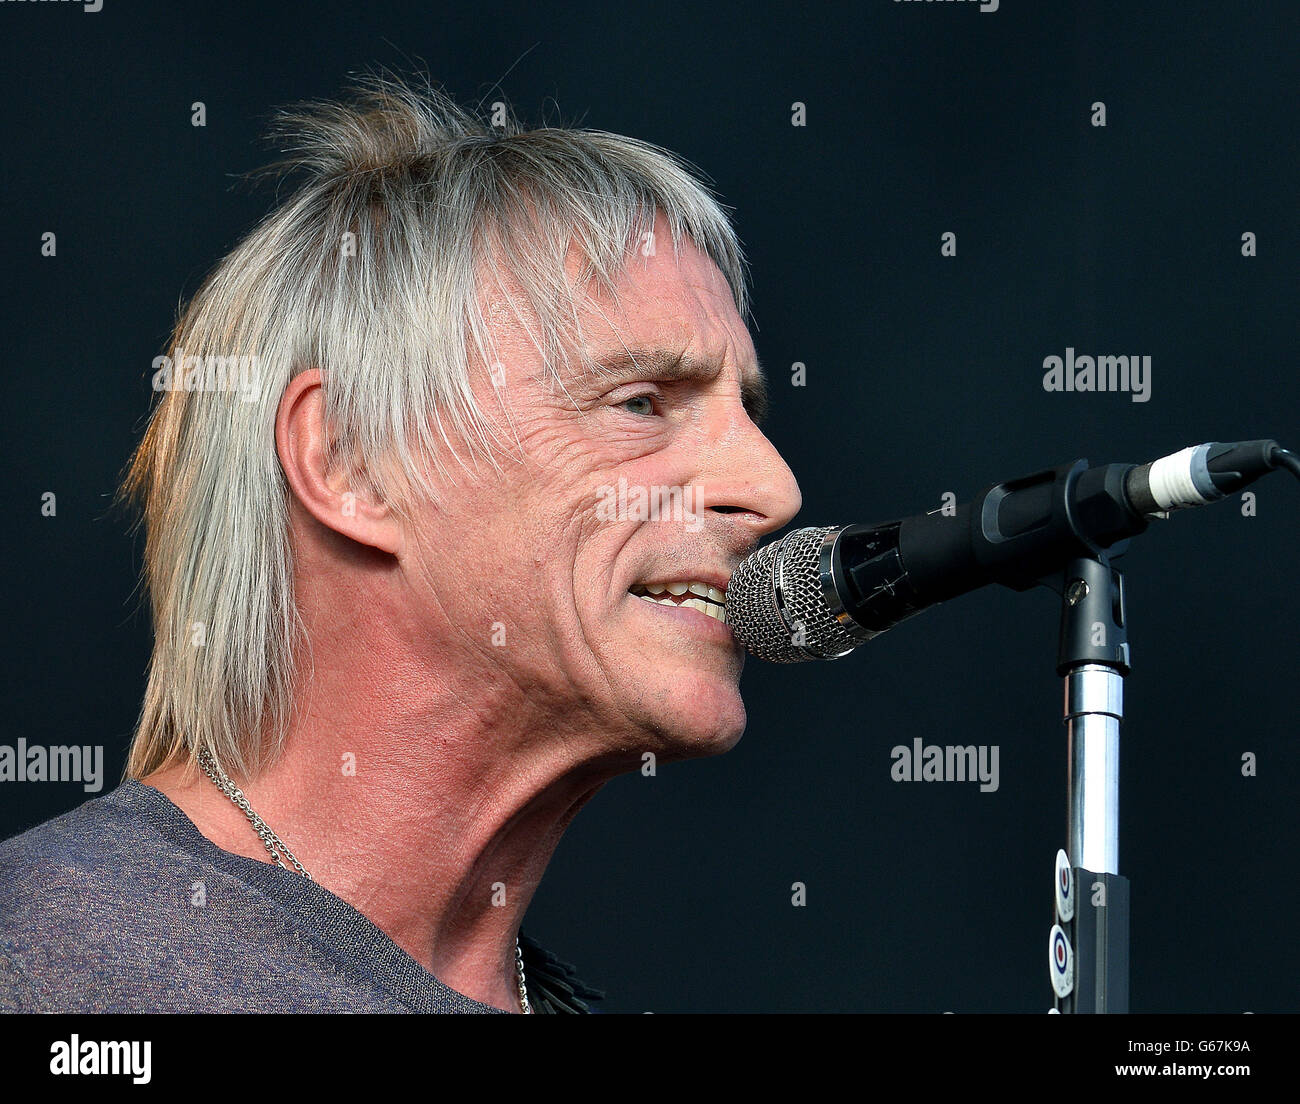 Paul Weller performs on stage at the Hard Rock calling music festival at Queen Elizabeth Olympic Park in Stratford east London. Stock Photo